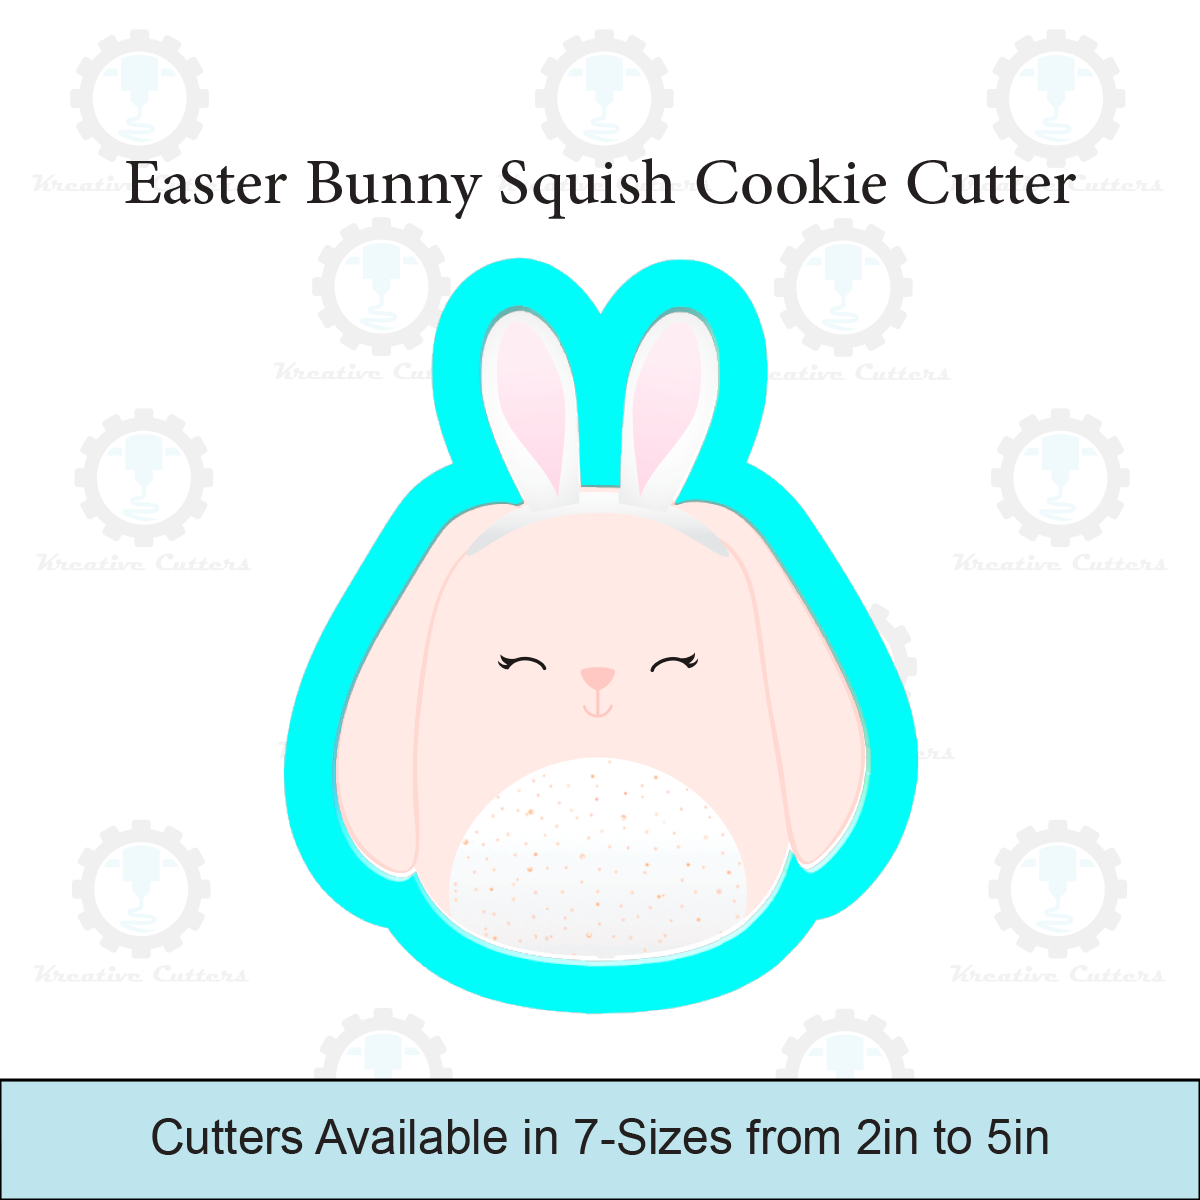 Easter Bunny Squish Cookie Cutters